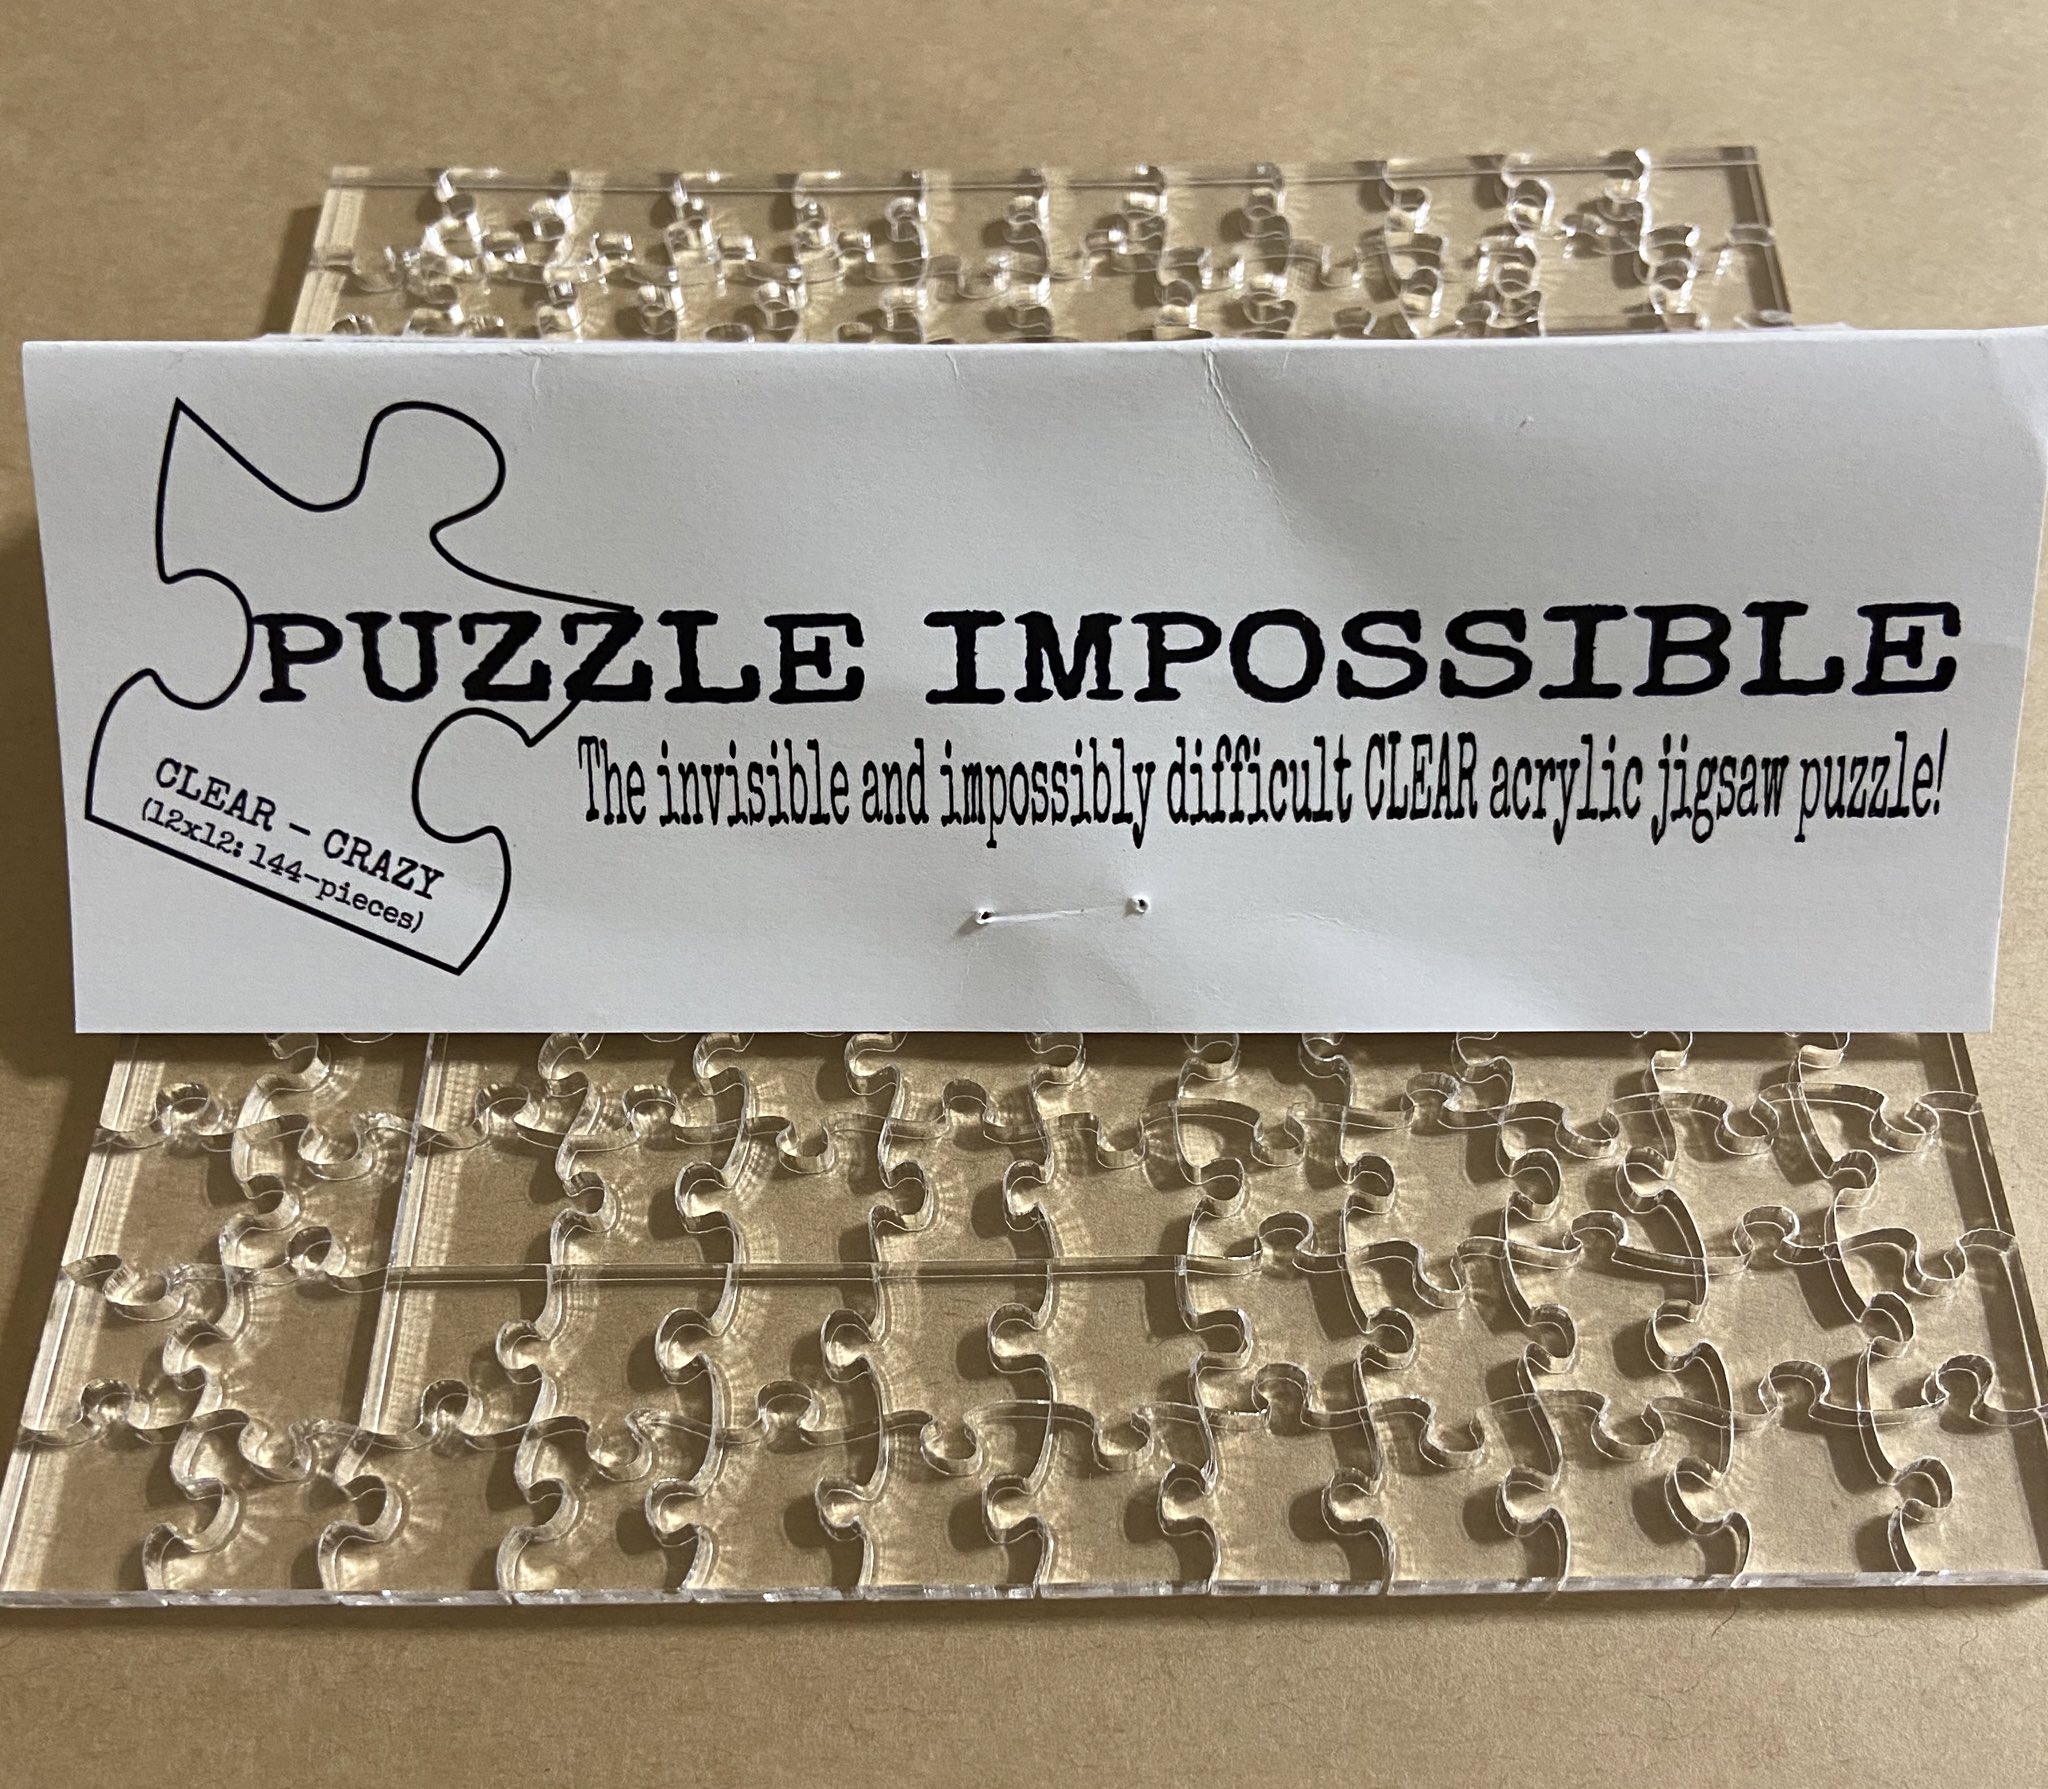 Puzzle Impossible - The Invisible and impossibly Difficult Clear Acrylic  Jigsaw Puzzle - 12x12: Insane (144 Pieces)